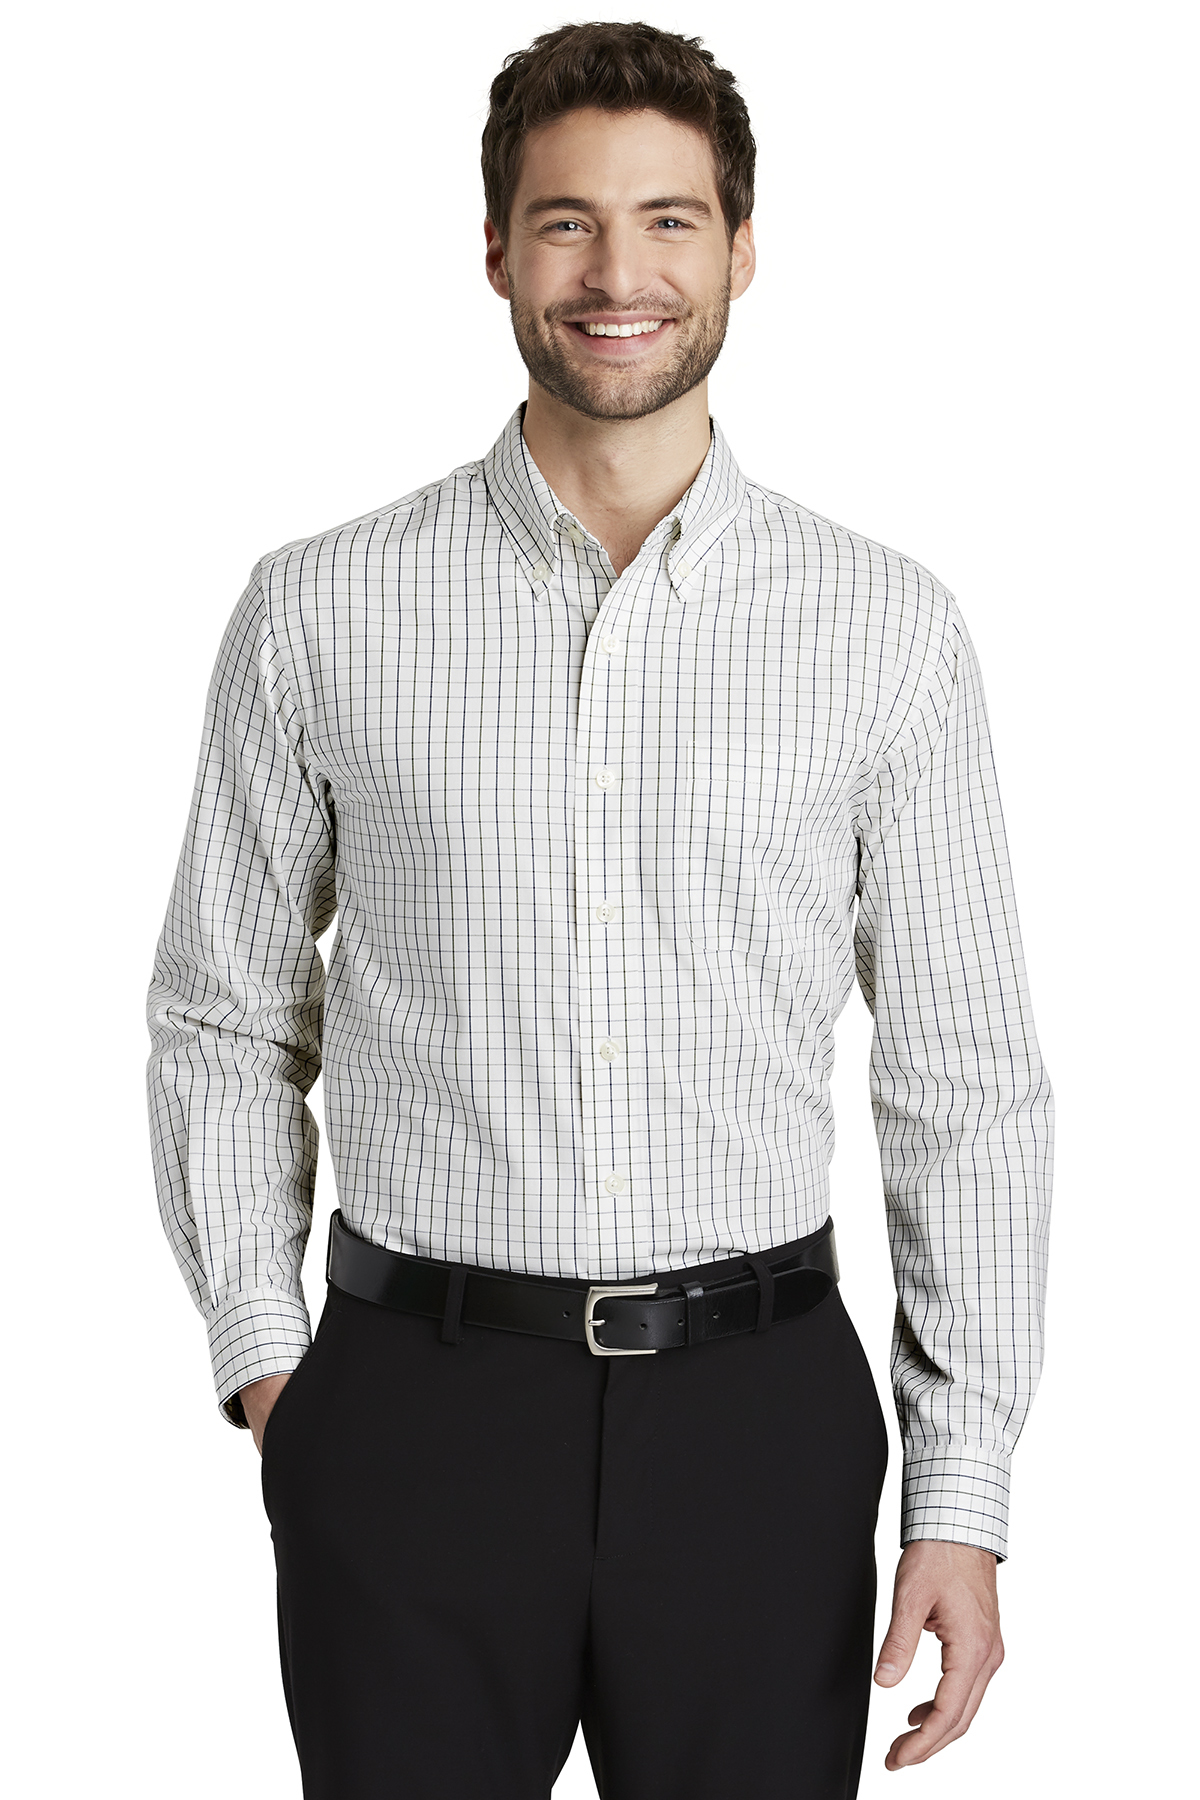 Port Authority Tattersall Easy Care Shirt | Product | SanMar